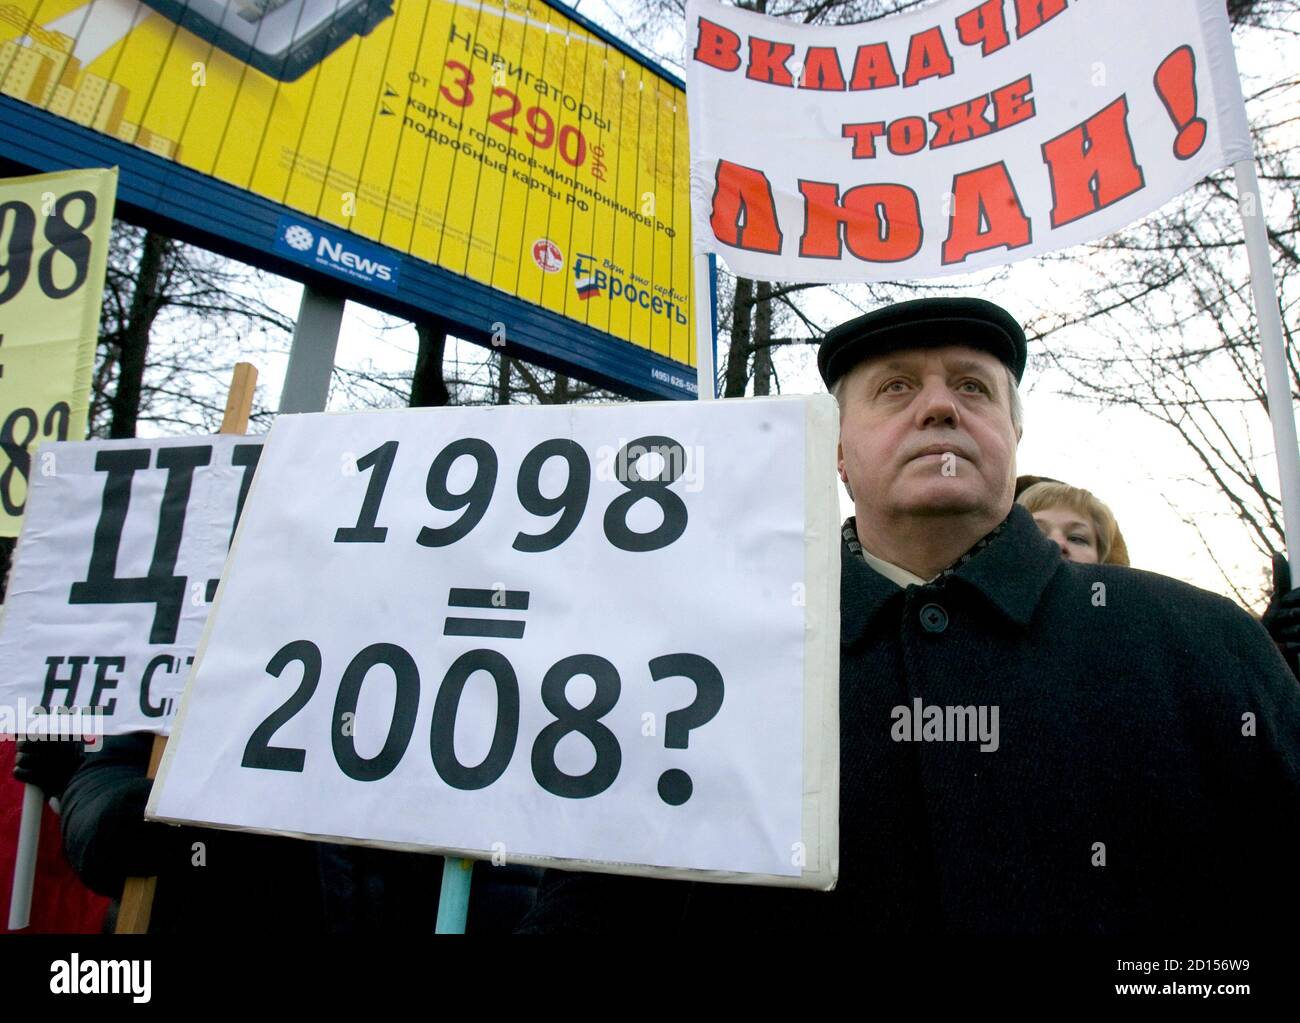 An investor of the bank Kapital Kredit stands with a placard during a picket in front of the main building in Moscow, December 19, 2008. Bank investors gathered to claim their money from the bank.  REUTERS/Sergei Karpukhin  (RUSSIA) Stock Photo